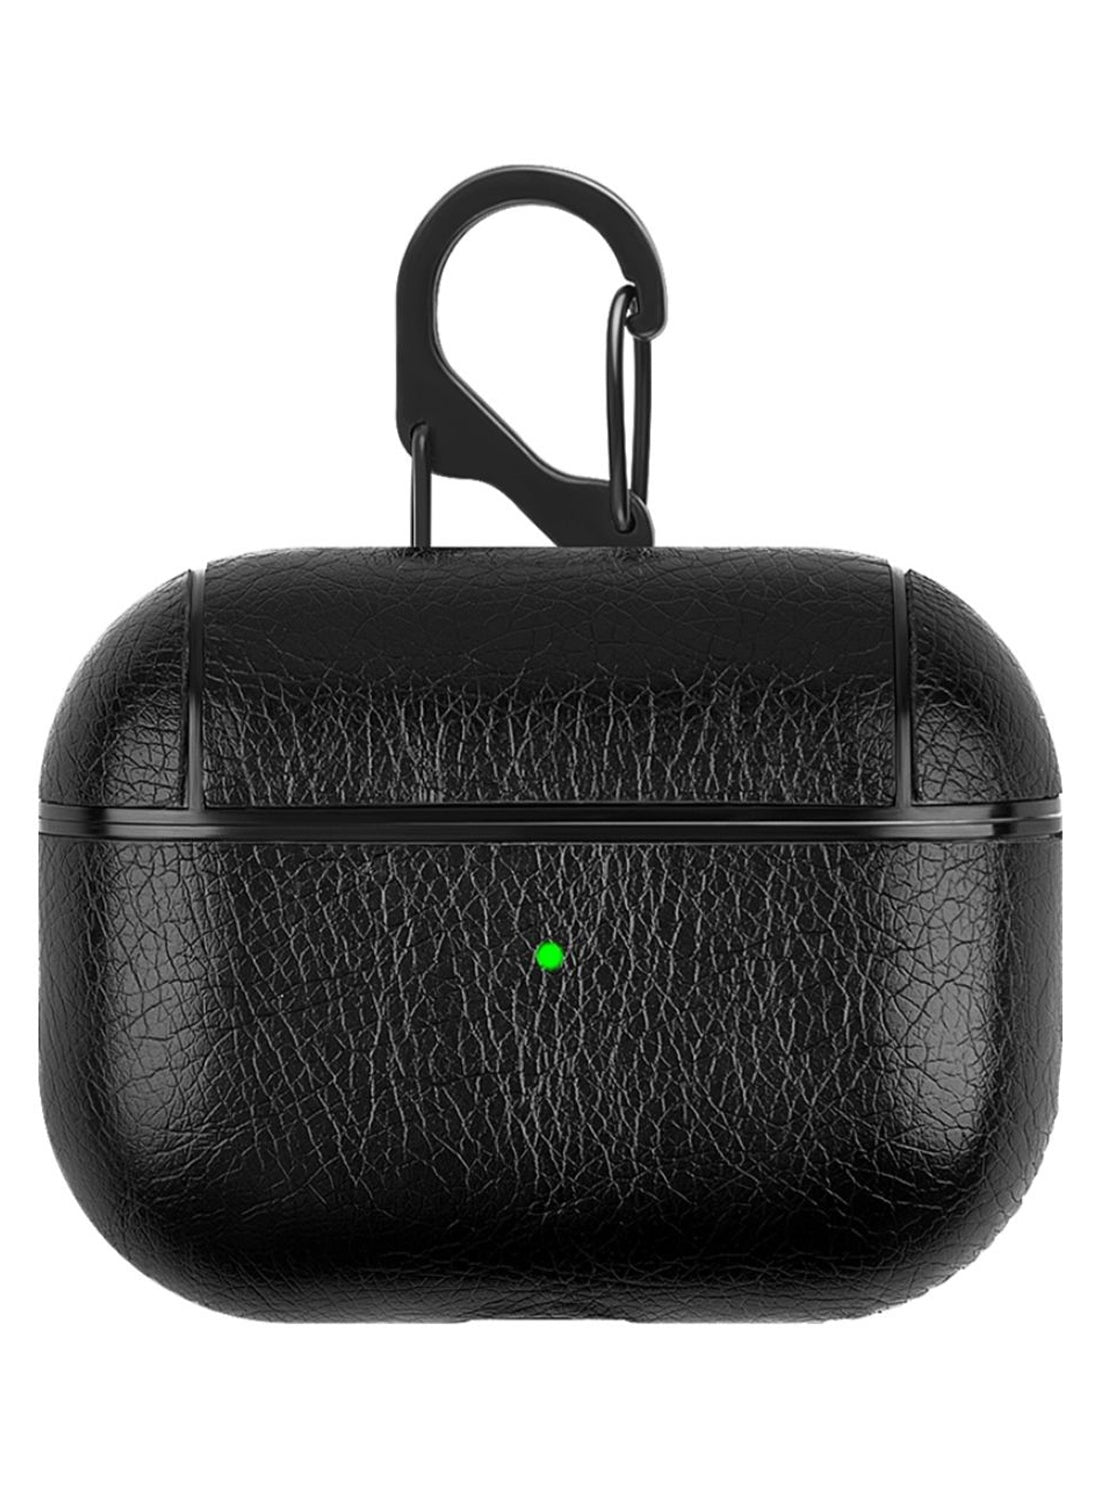 Protective Charging Box Case Cover With Carabiner For Apple AirPods Pro Black